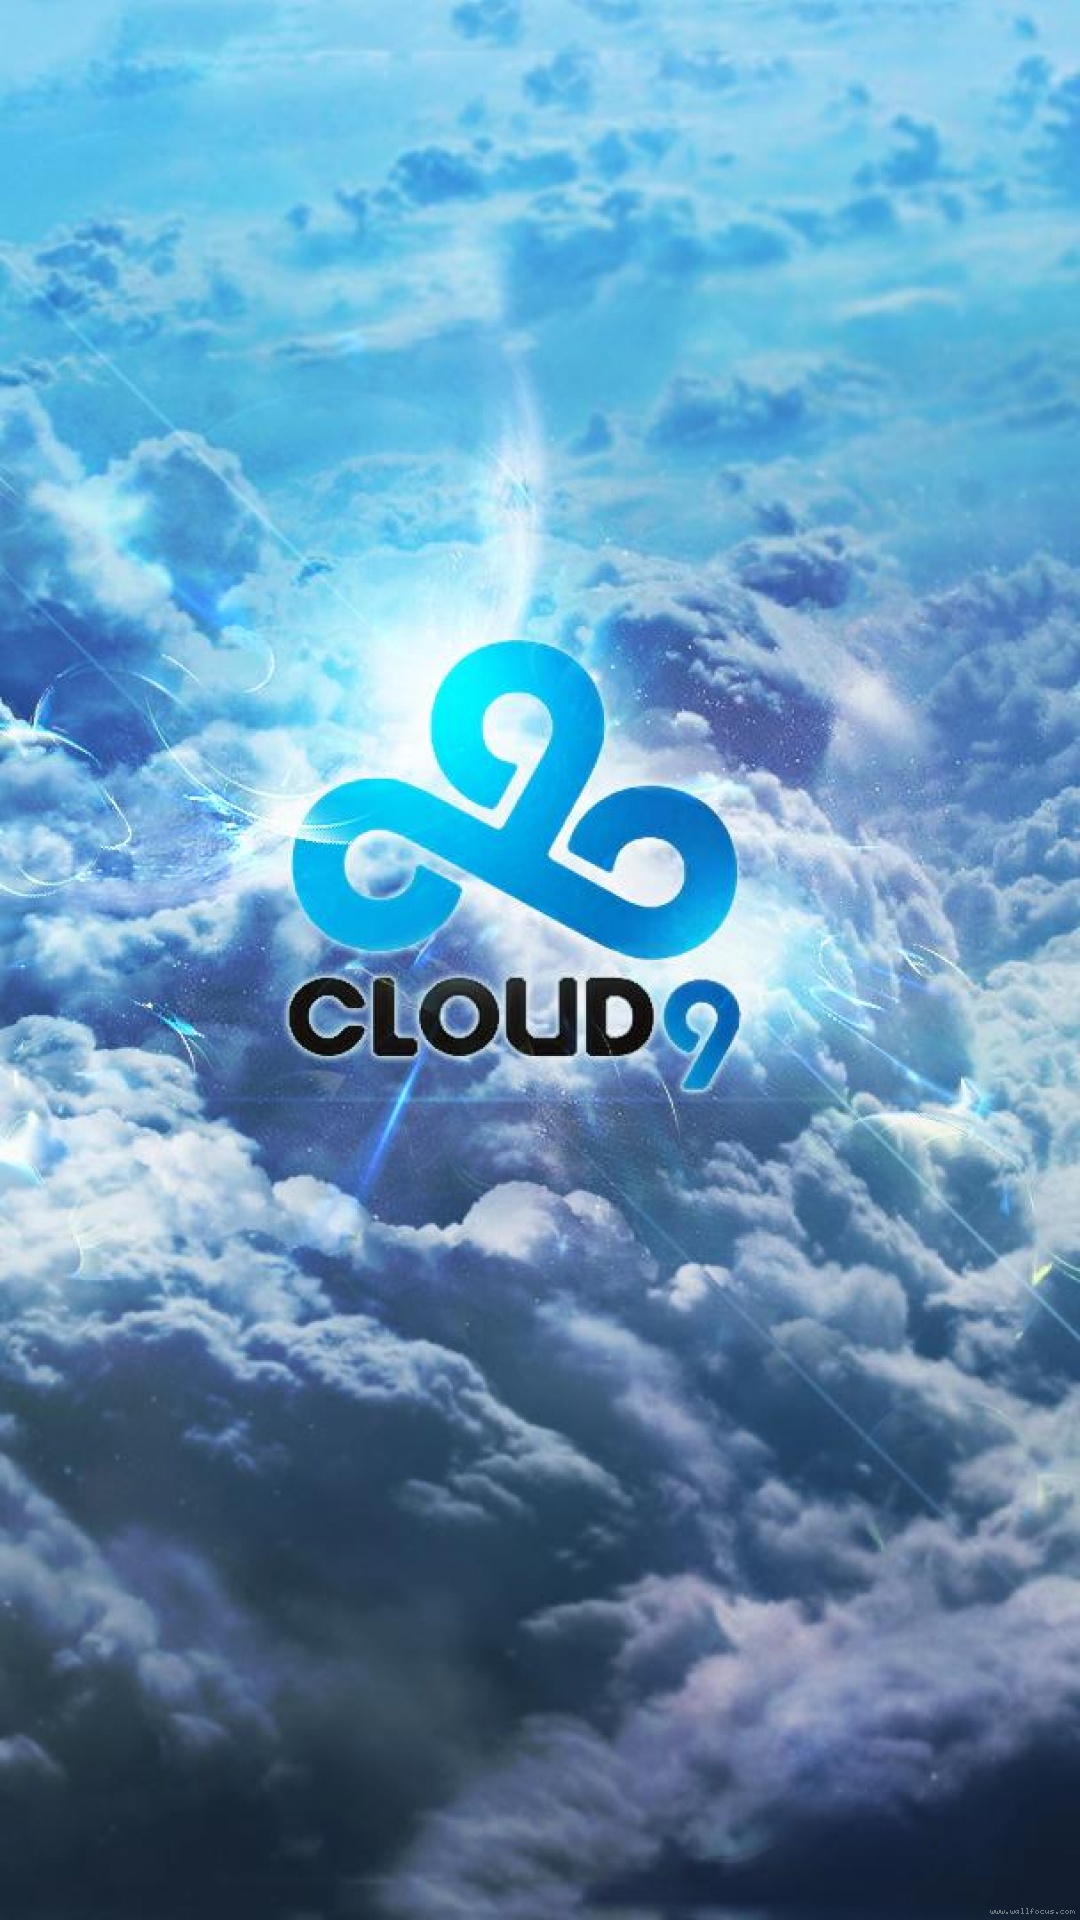 Cloud 9 Photos, Download The BEST Free Cloud 9 Stock Photos & HD Images